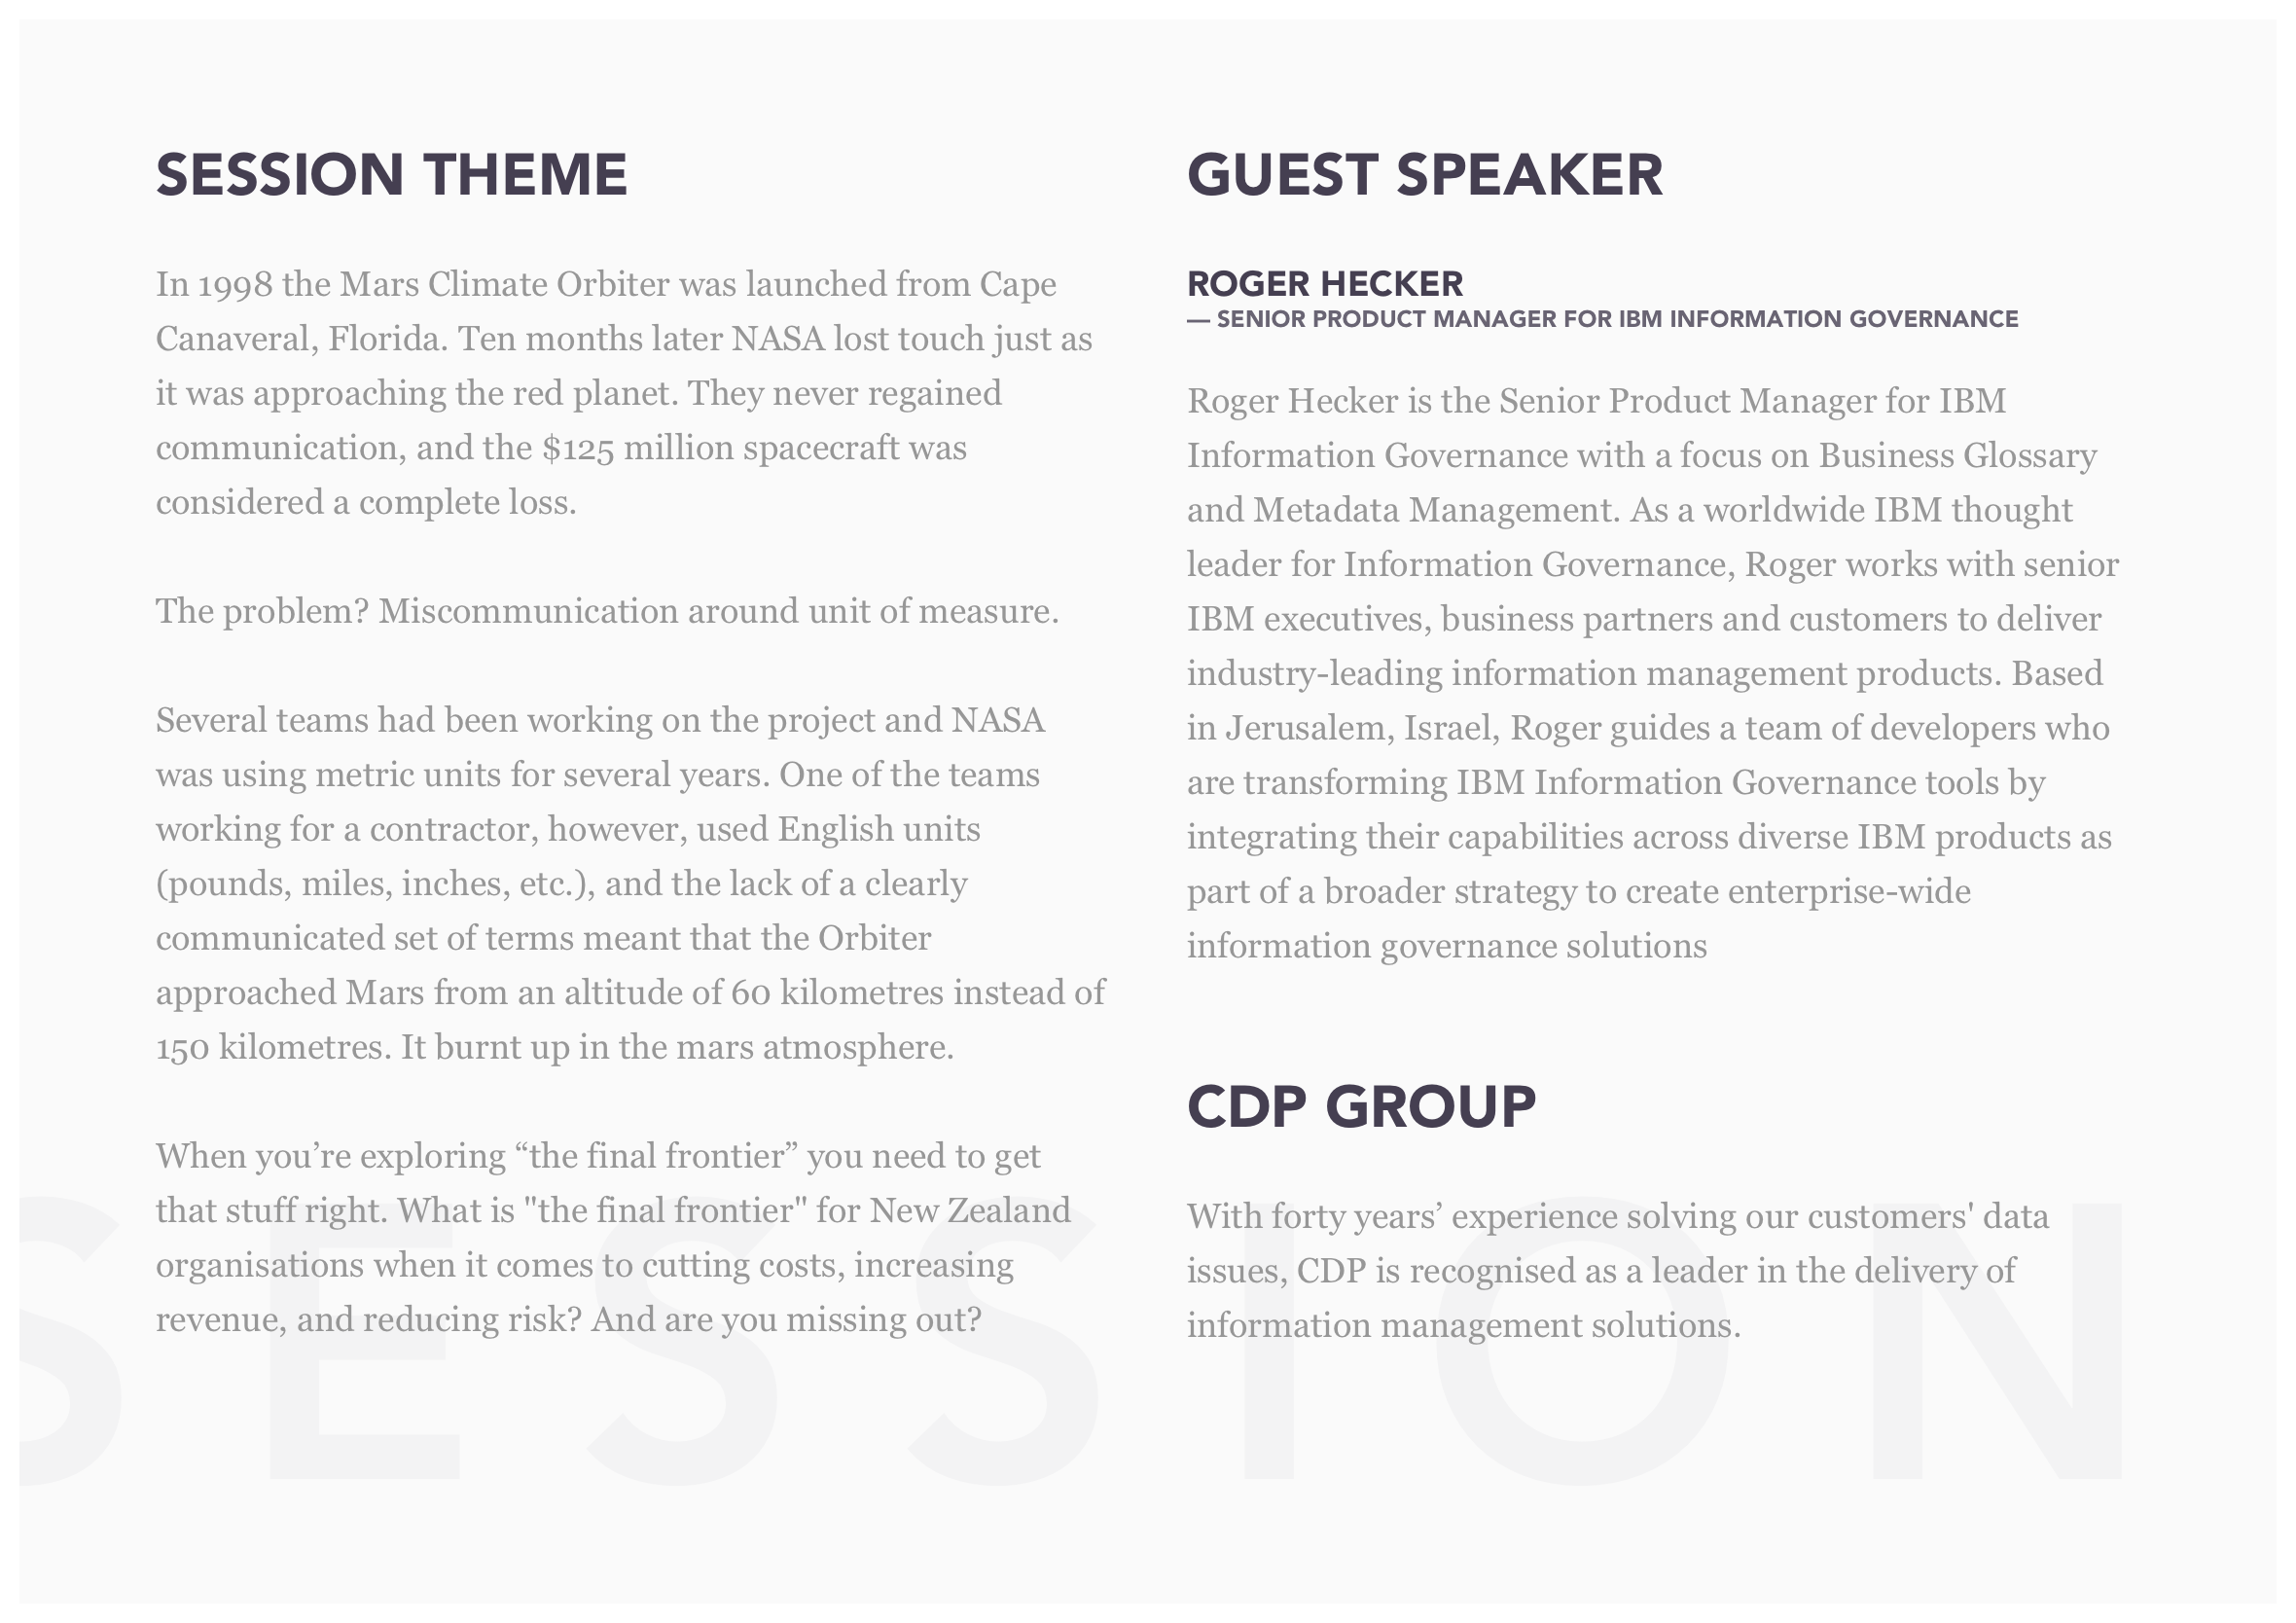 CDP executive lunch invitation session theme